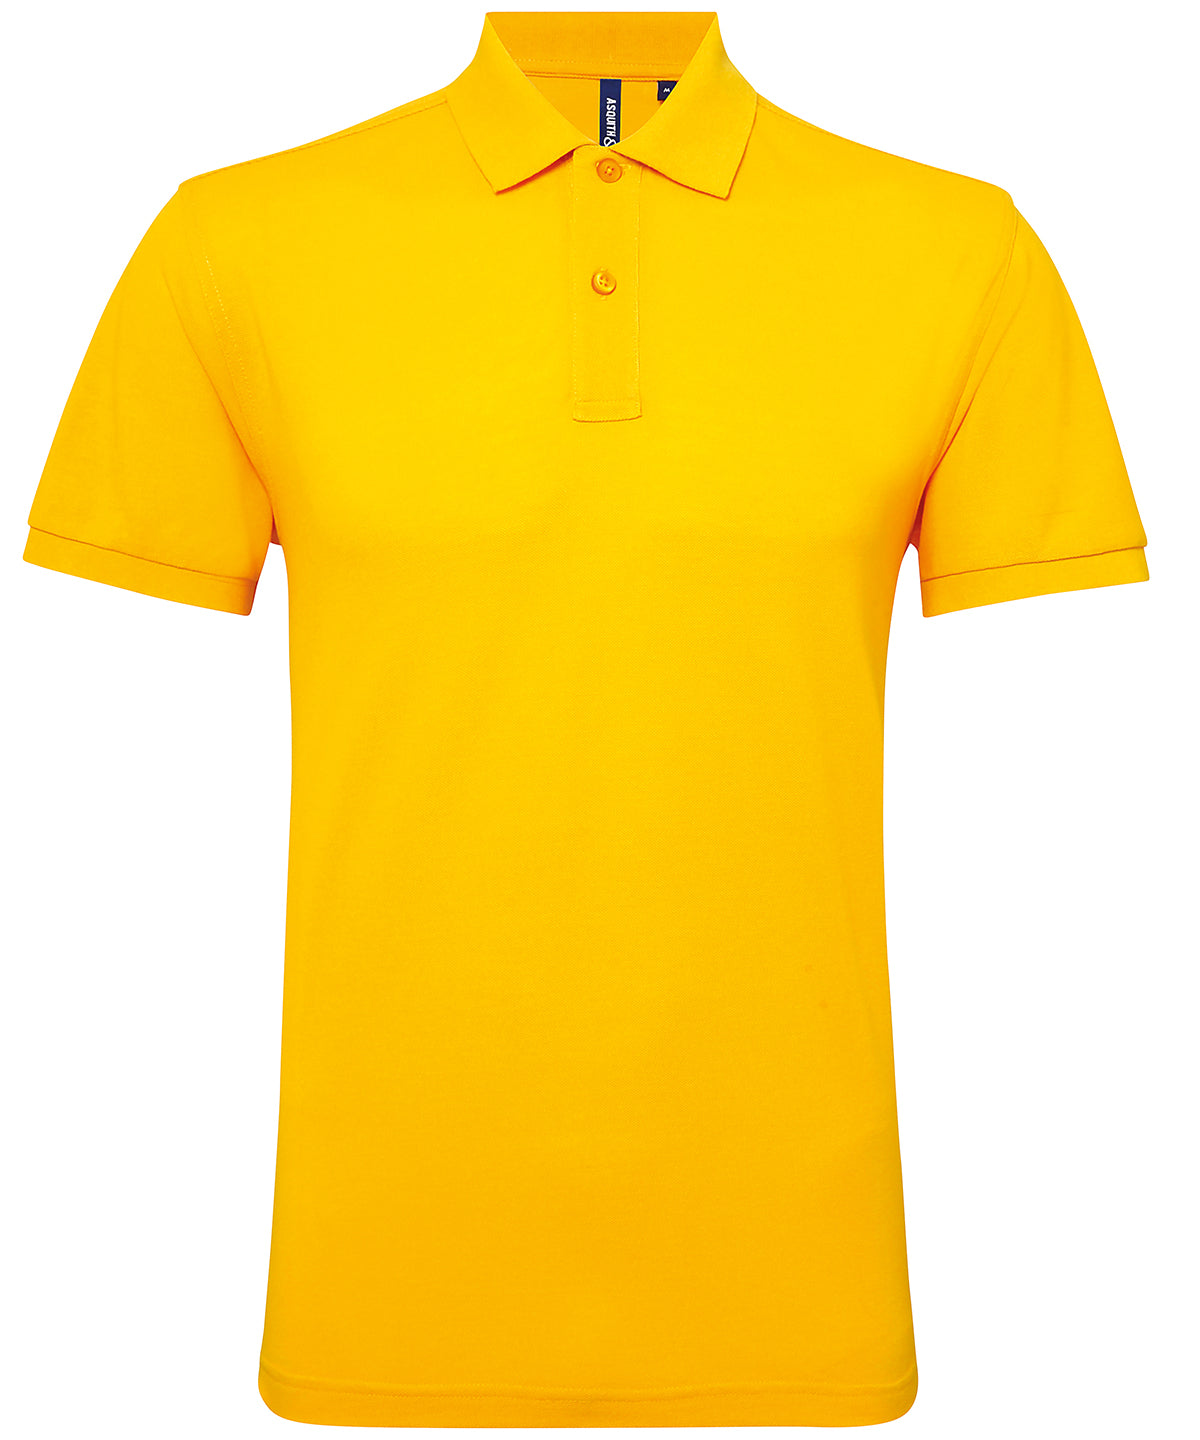 Personalised Polo Shirts - Royal Asquith & Fox Men’s polycotton blend polo